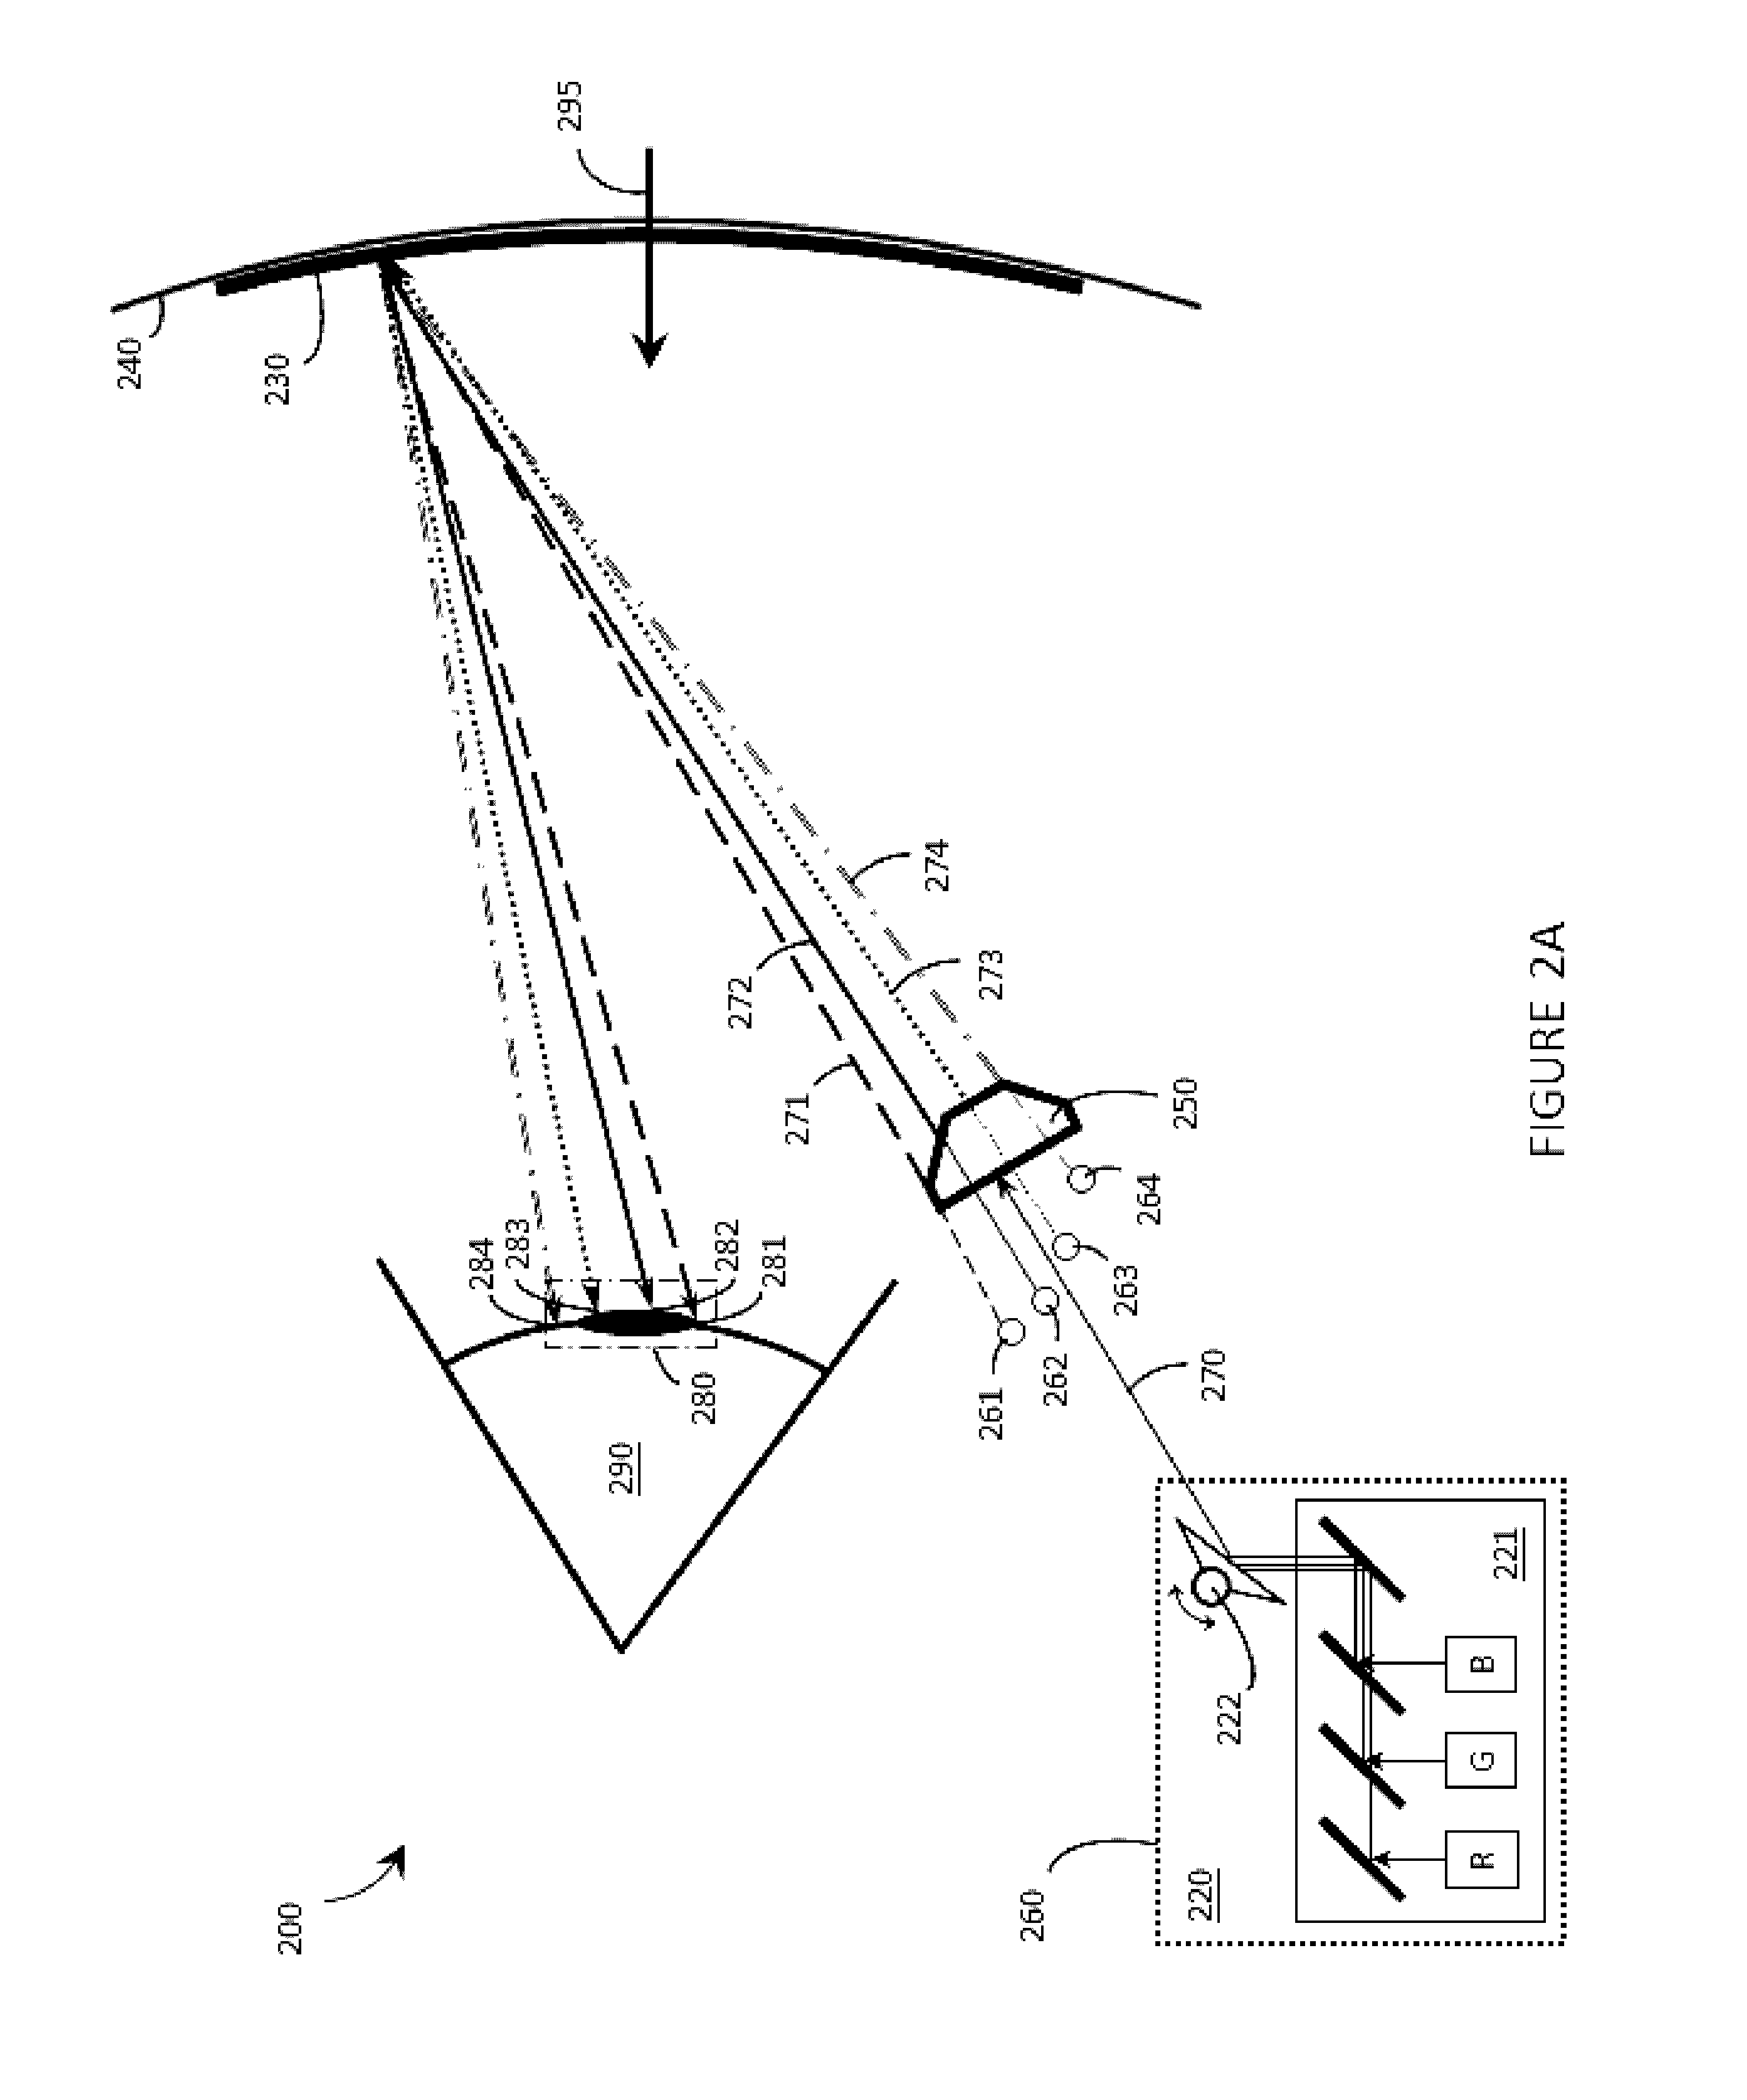 Systems, devices, and methods for eyebox expansion in wearable heads-up displays